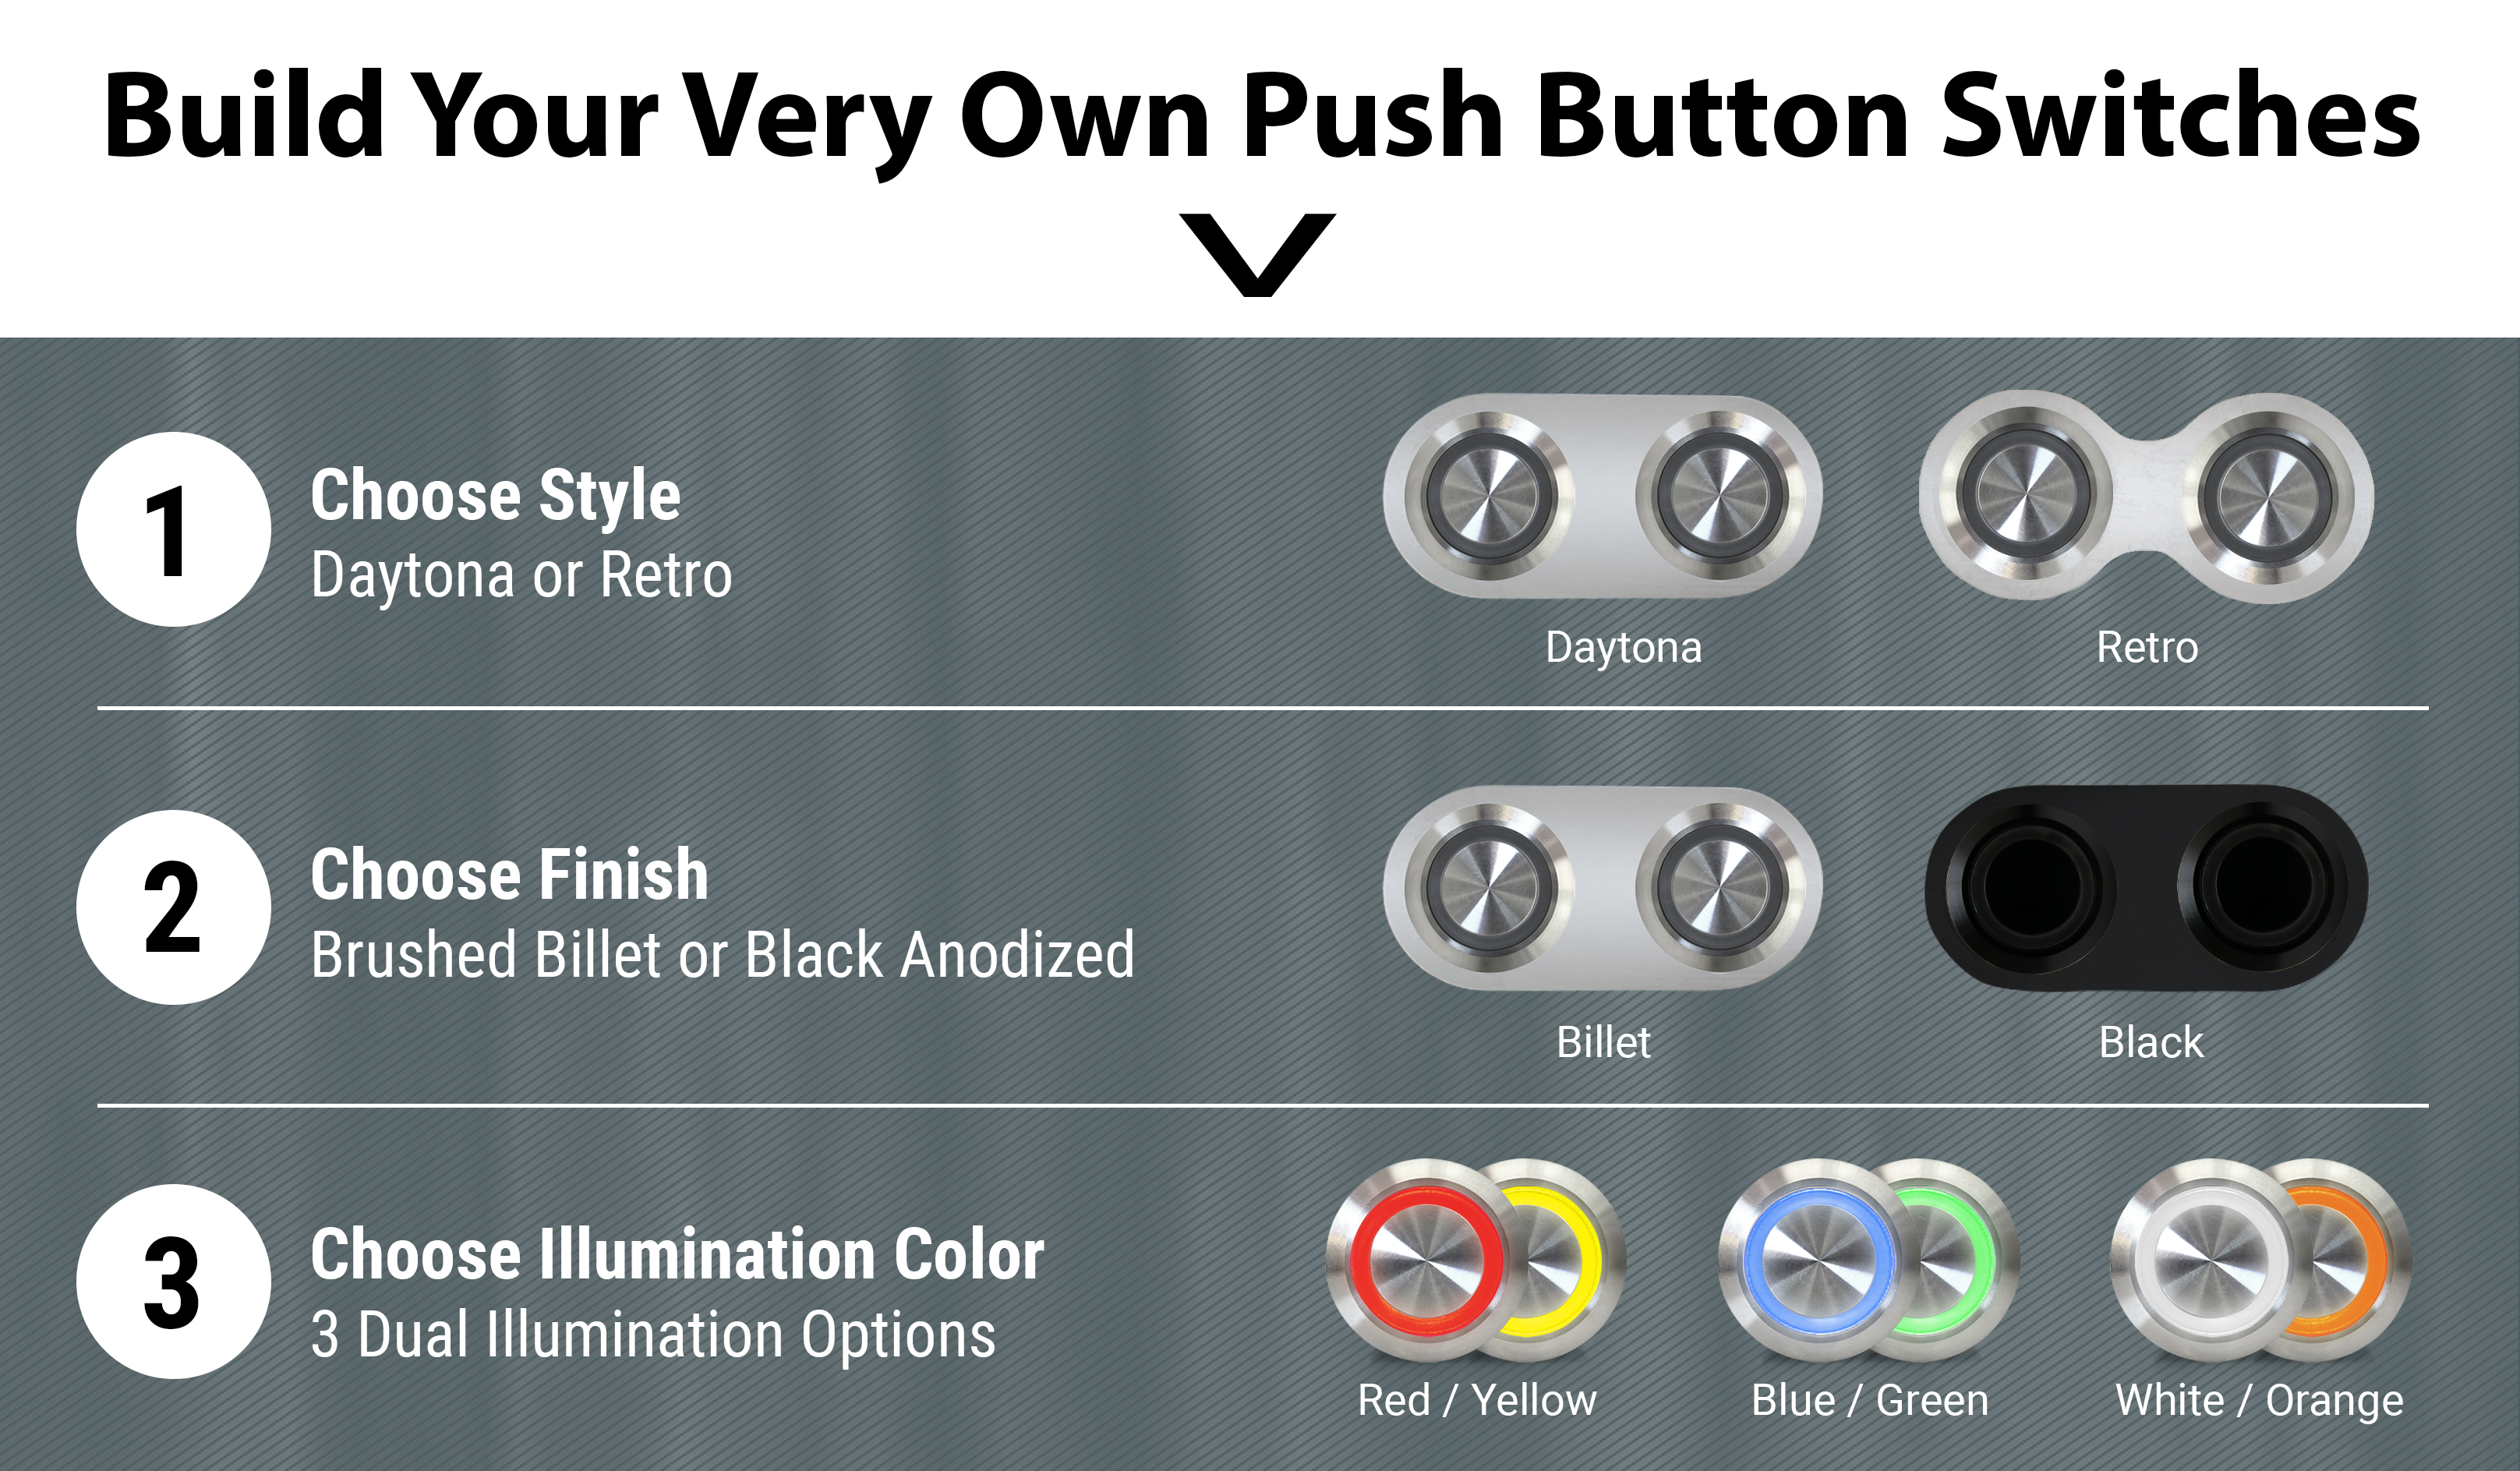 Build Your Very Own Push Button Switches > Steps